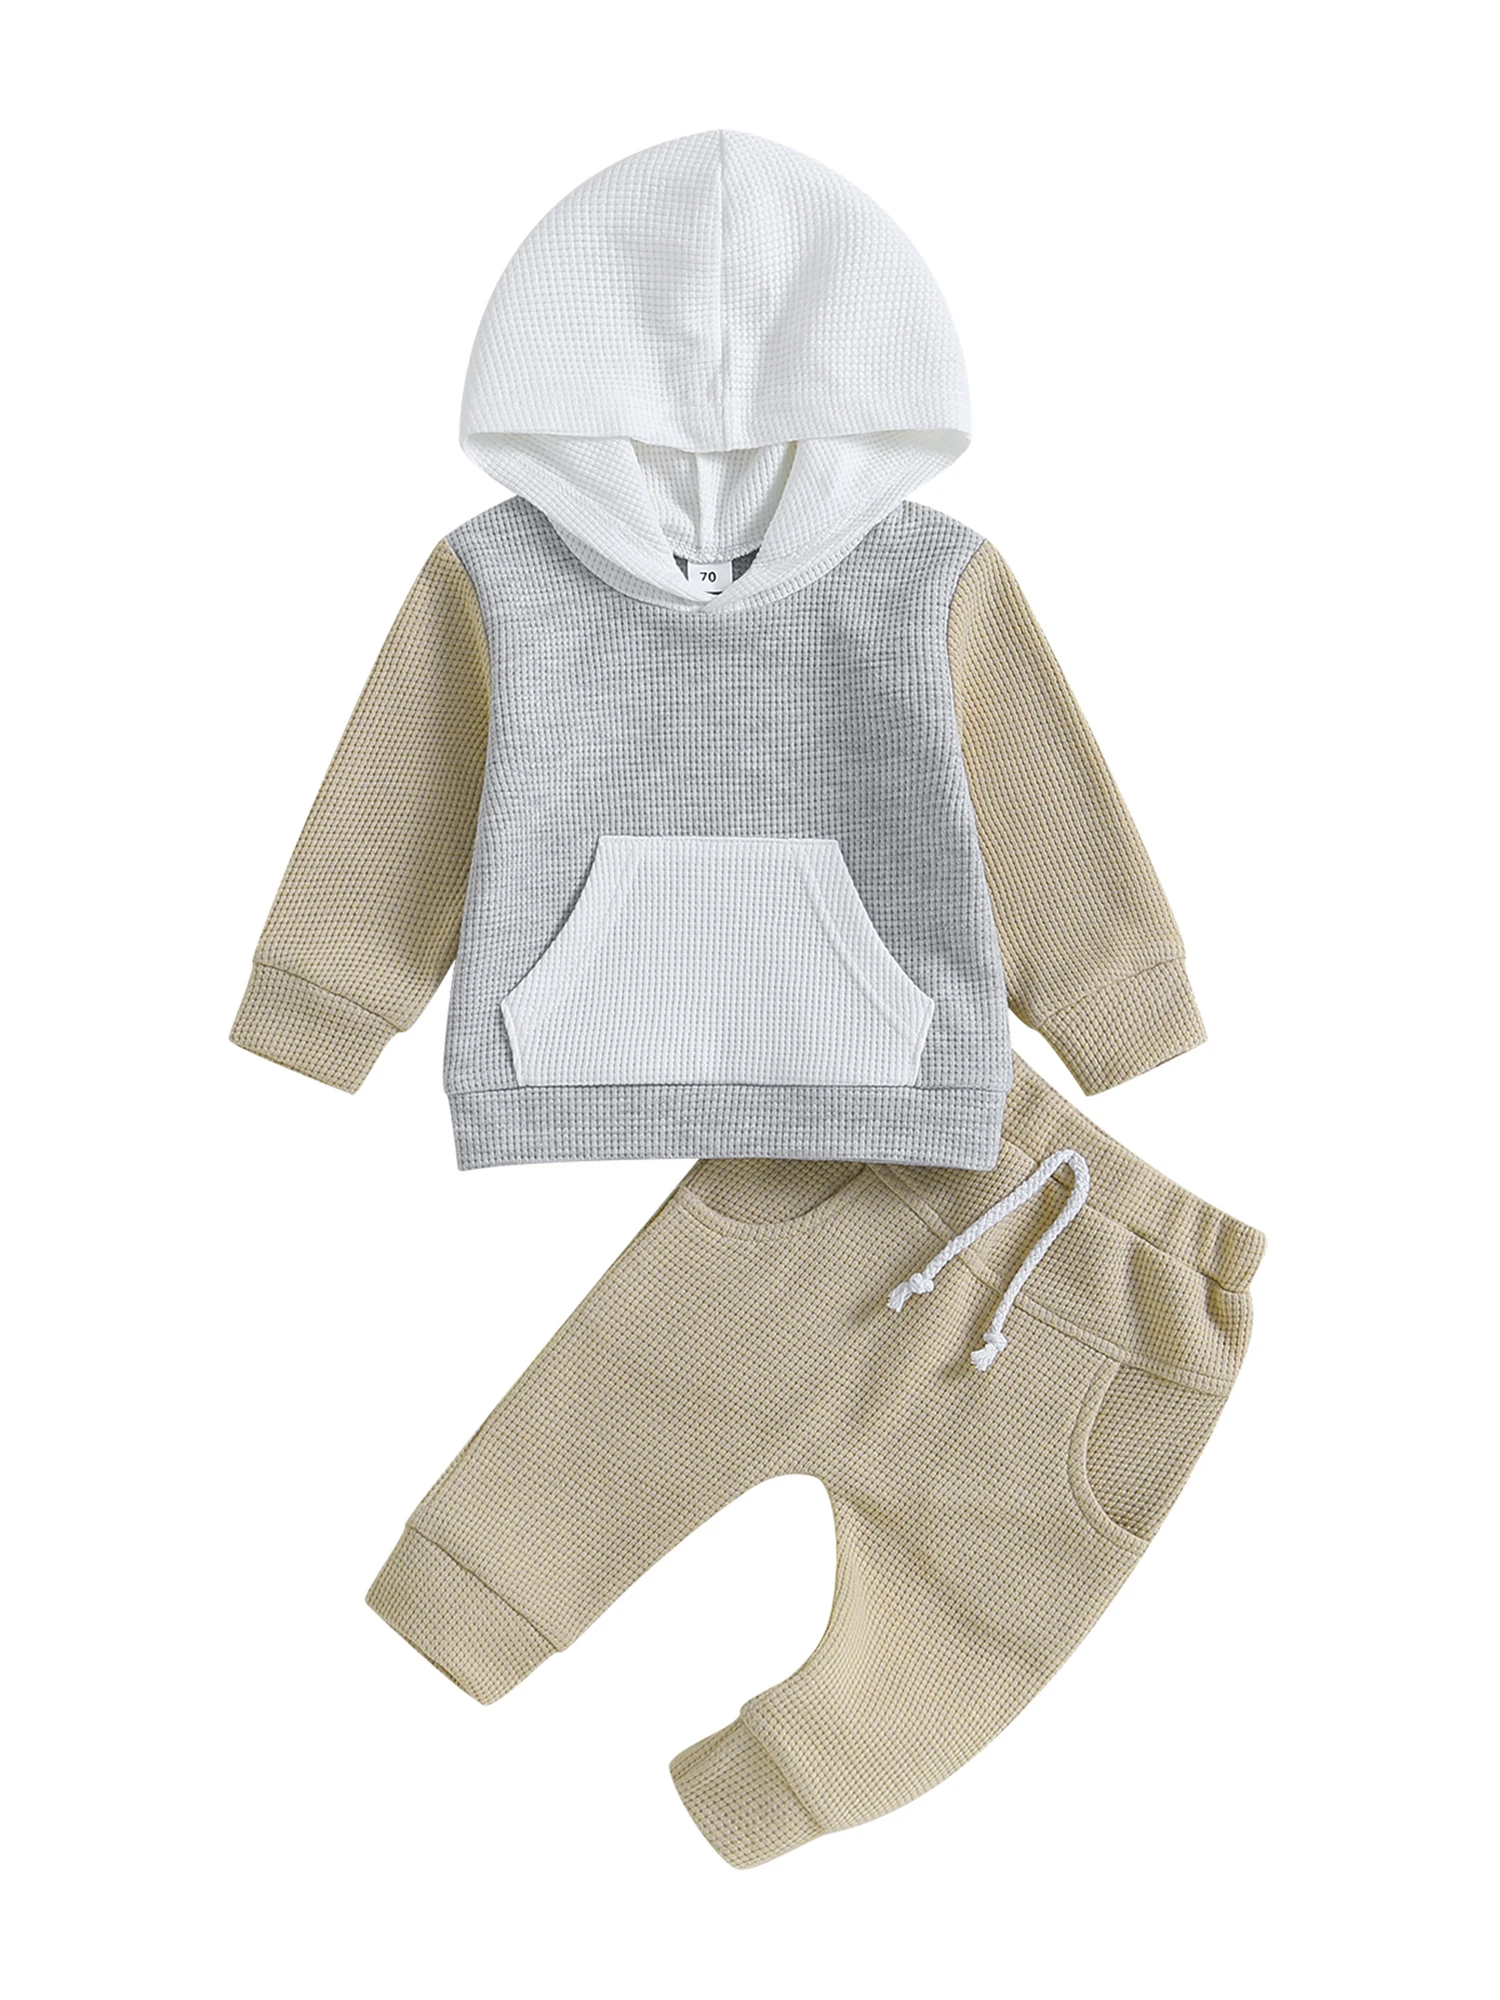 

Adorable Baby Boy Fall Clothes Set with Hooded Pullover and Casual Pants in Contrast Colors for a Stylish Look - Perfect for